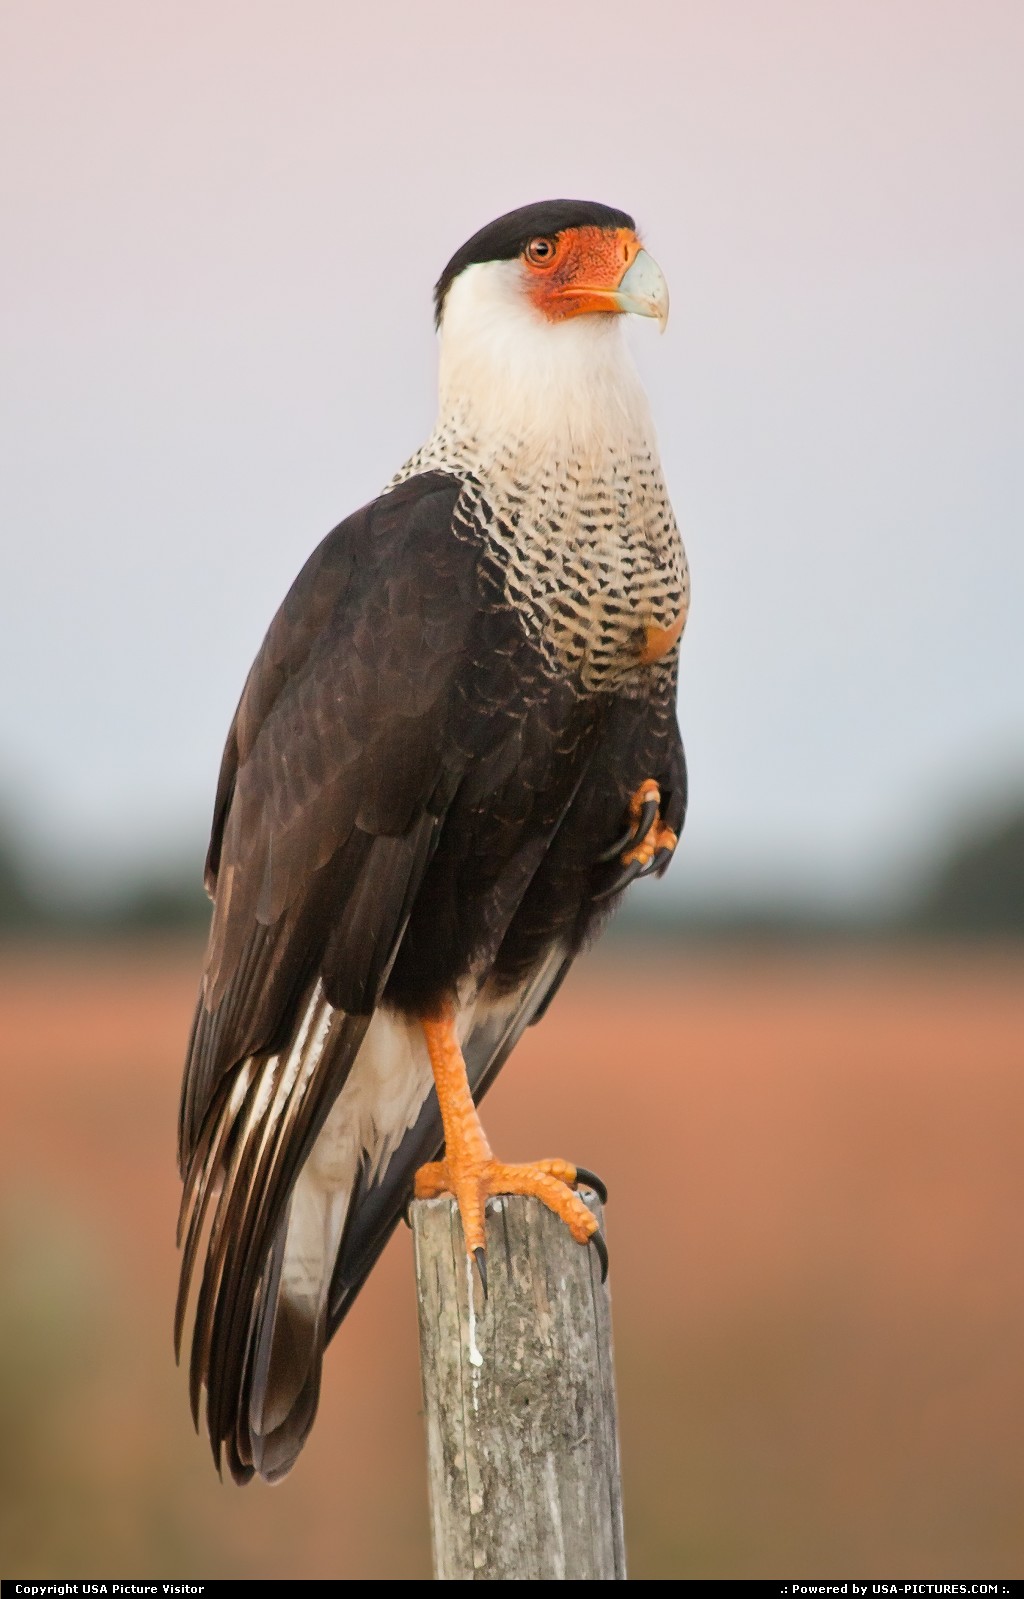 Picture by USA Picture Visitor: Sarasota Florida   northern, crested, caracara